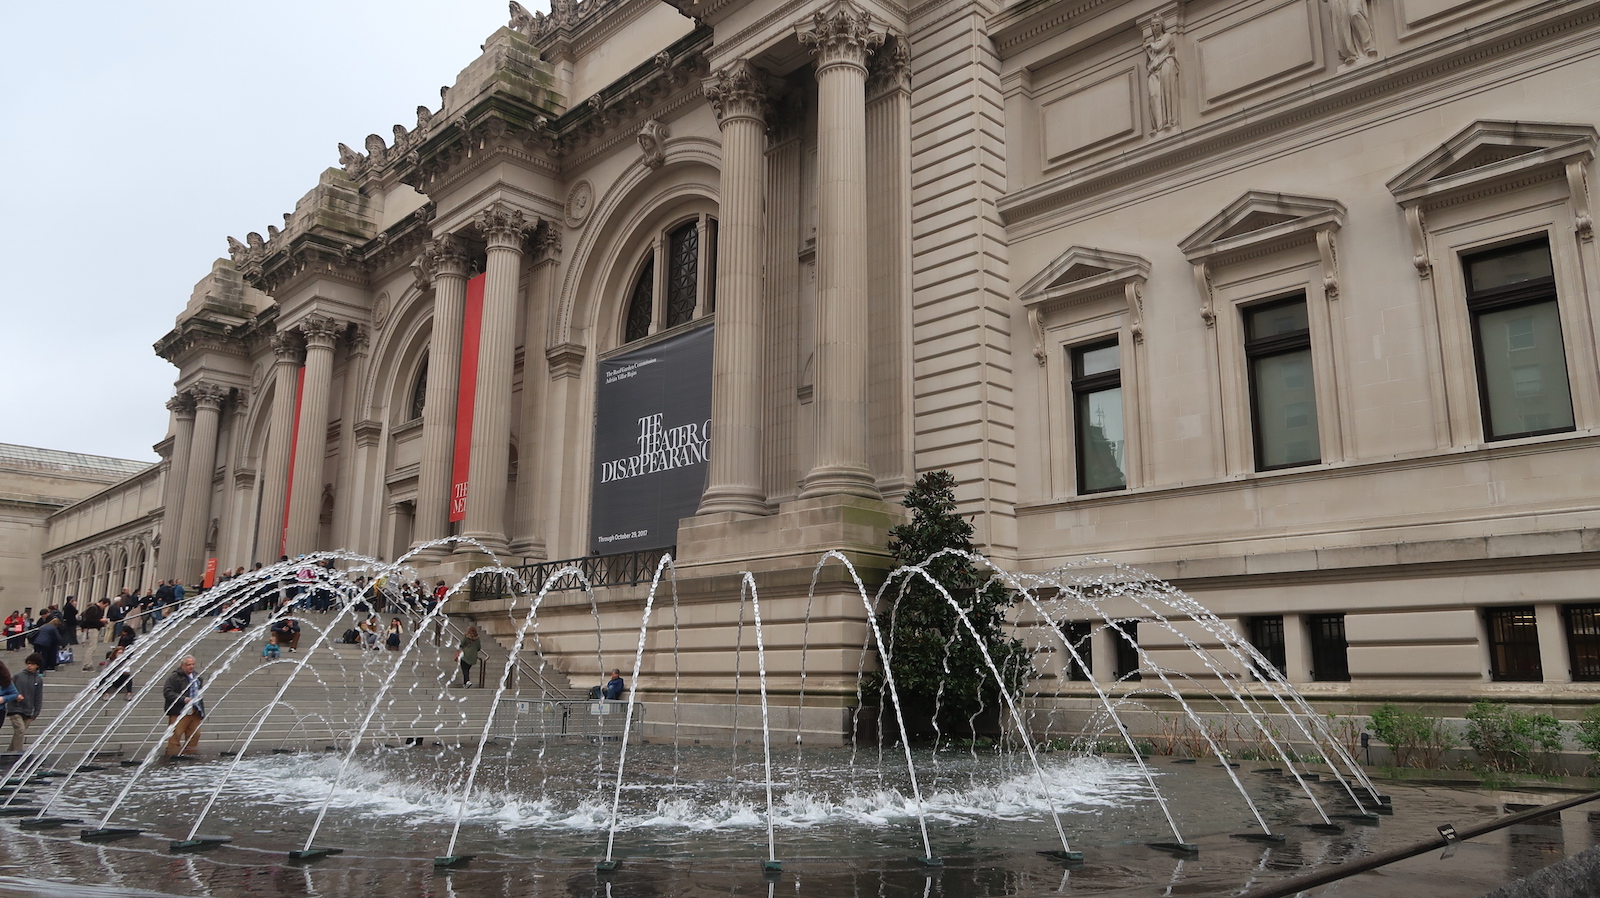 Top Things to See at the MET: The MET Museum Highlights Tour